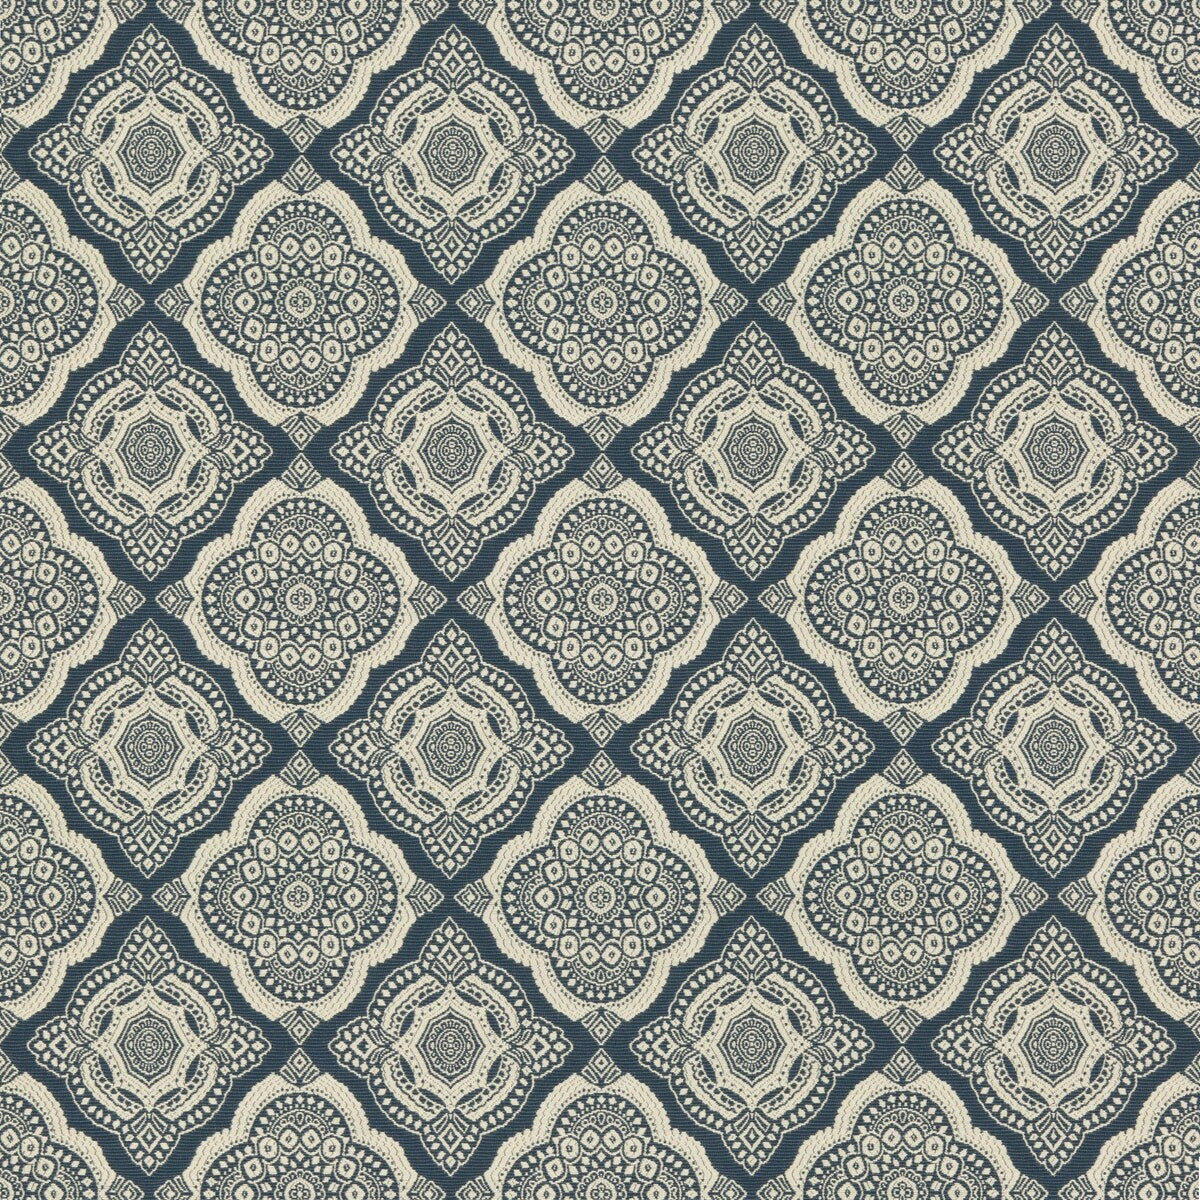 Kravet Contract fabric in 34742-5 color - pattern 34742.5.0 - by Kravet Contract in the Incase Crypton Gis collection